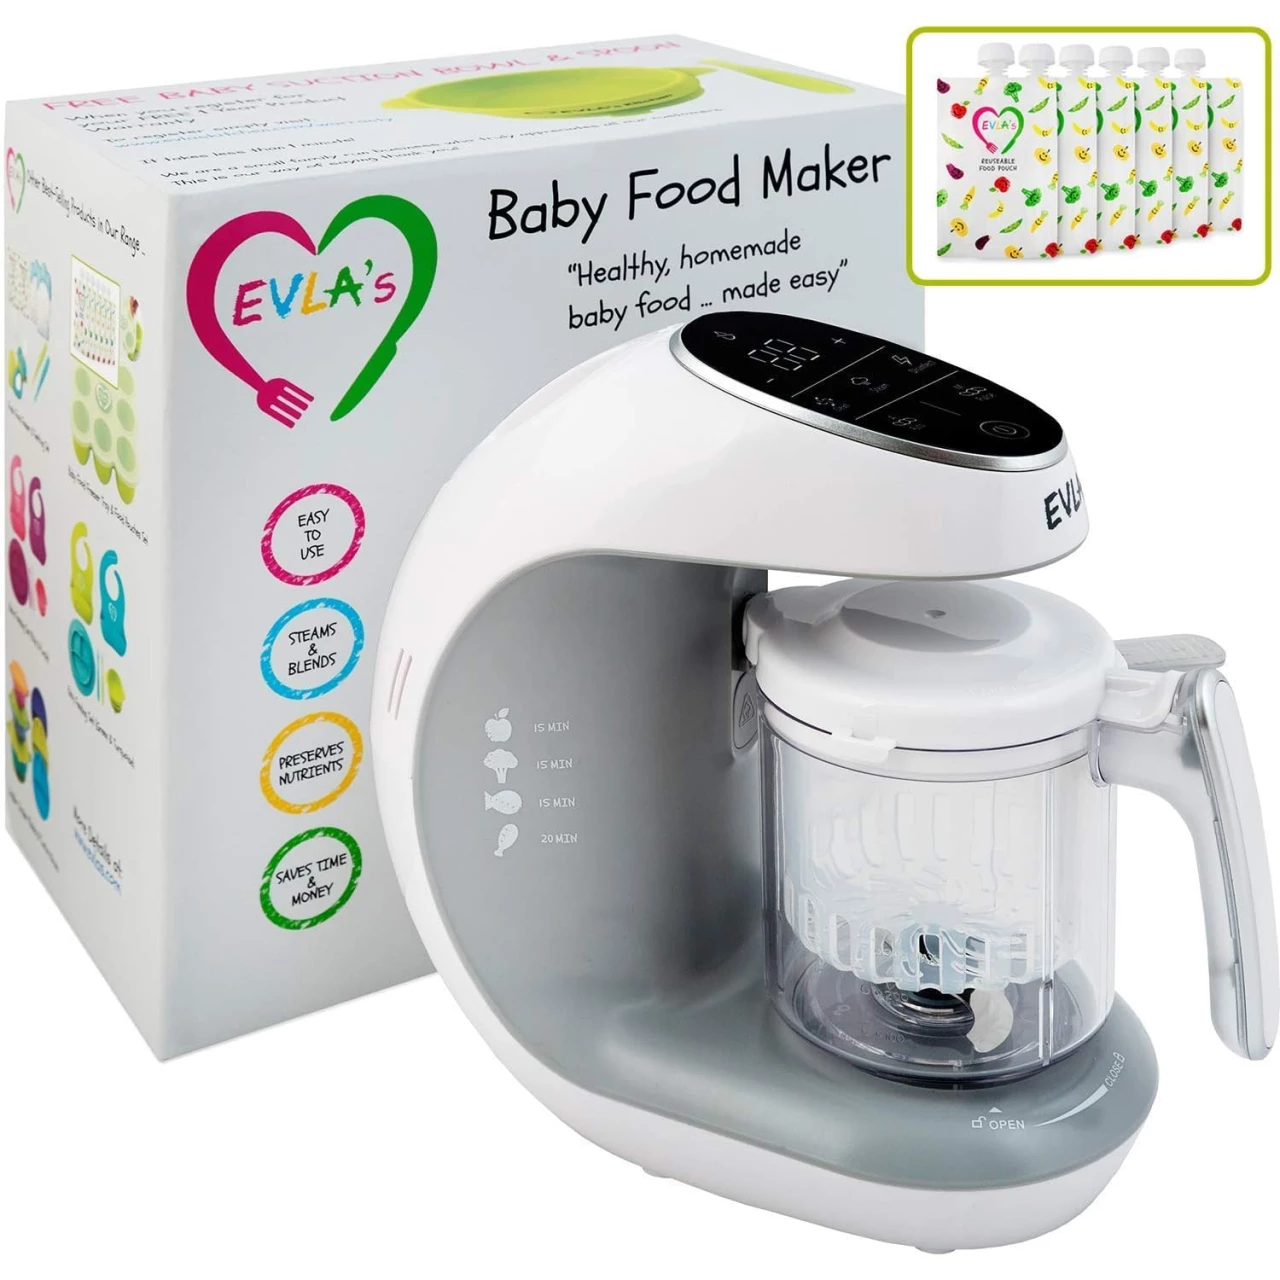 Baby Food Maker, Food Processor Blender Grinder Steamer | Cooks &amp; Blends Healthy,Homemade Food in Minutes | Self Cleans | Touch Screen Control | 6 Reusable Pouches